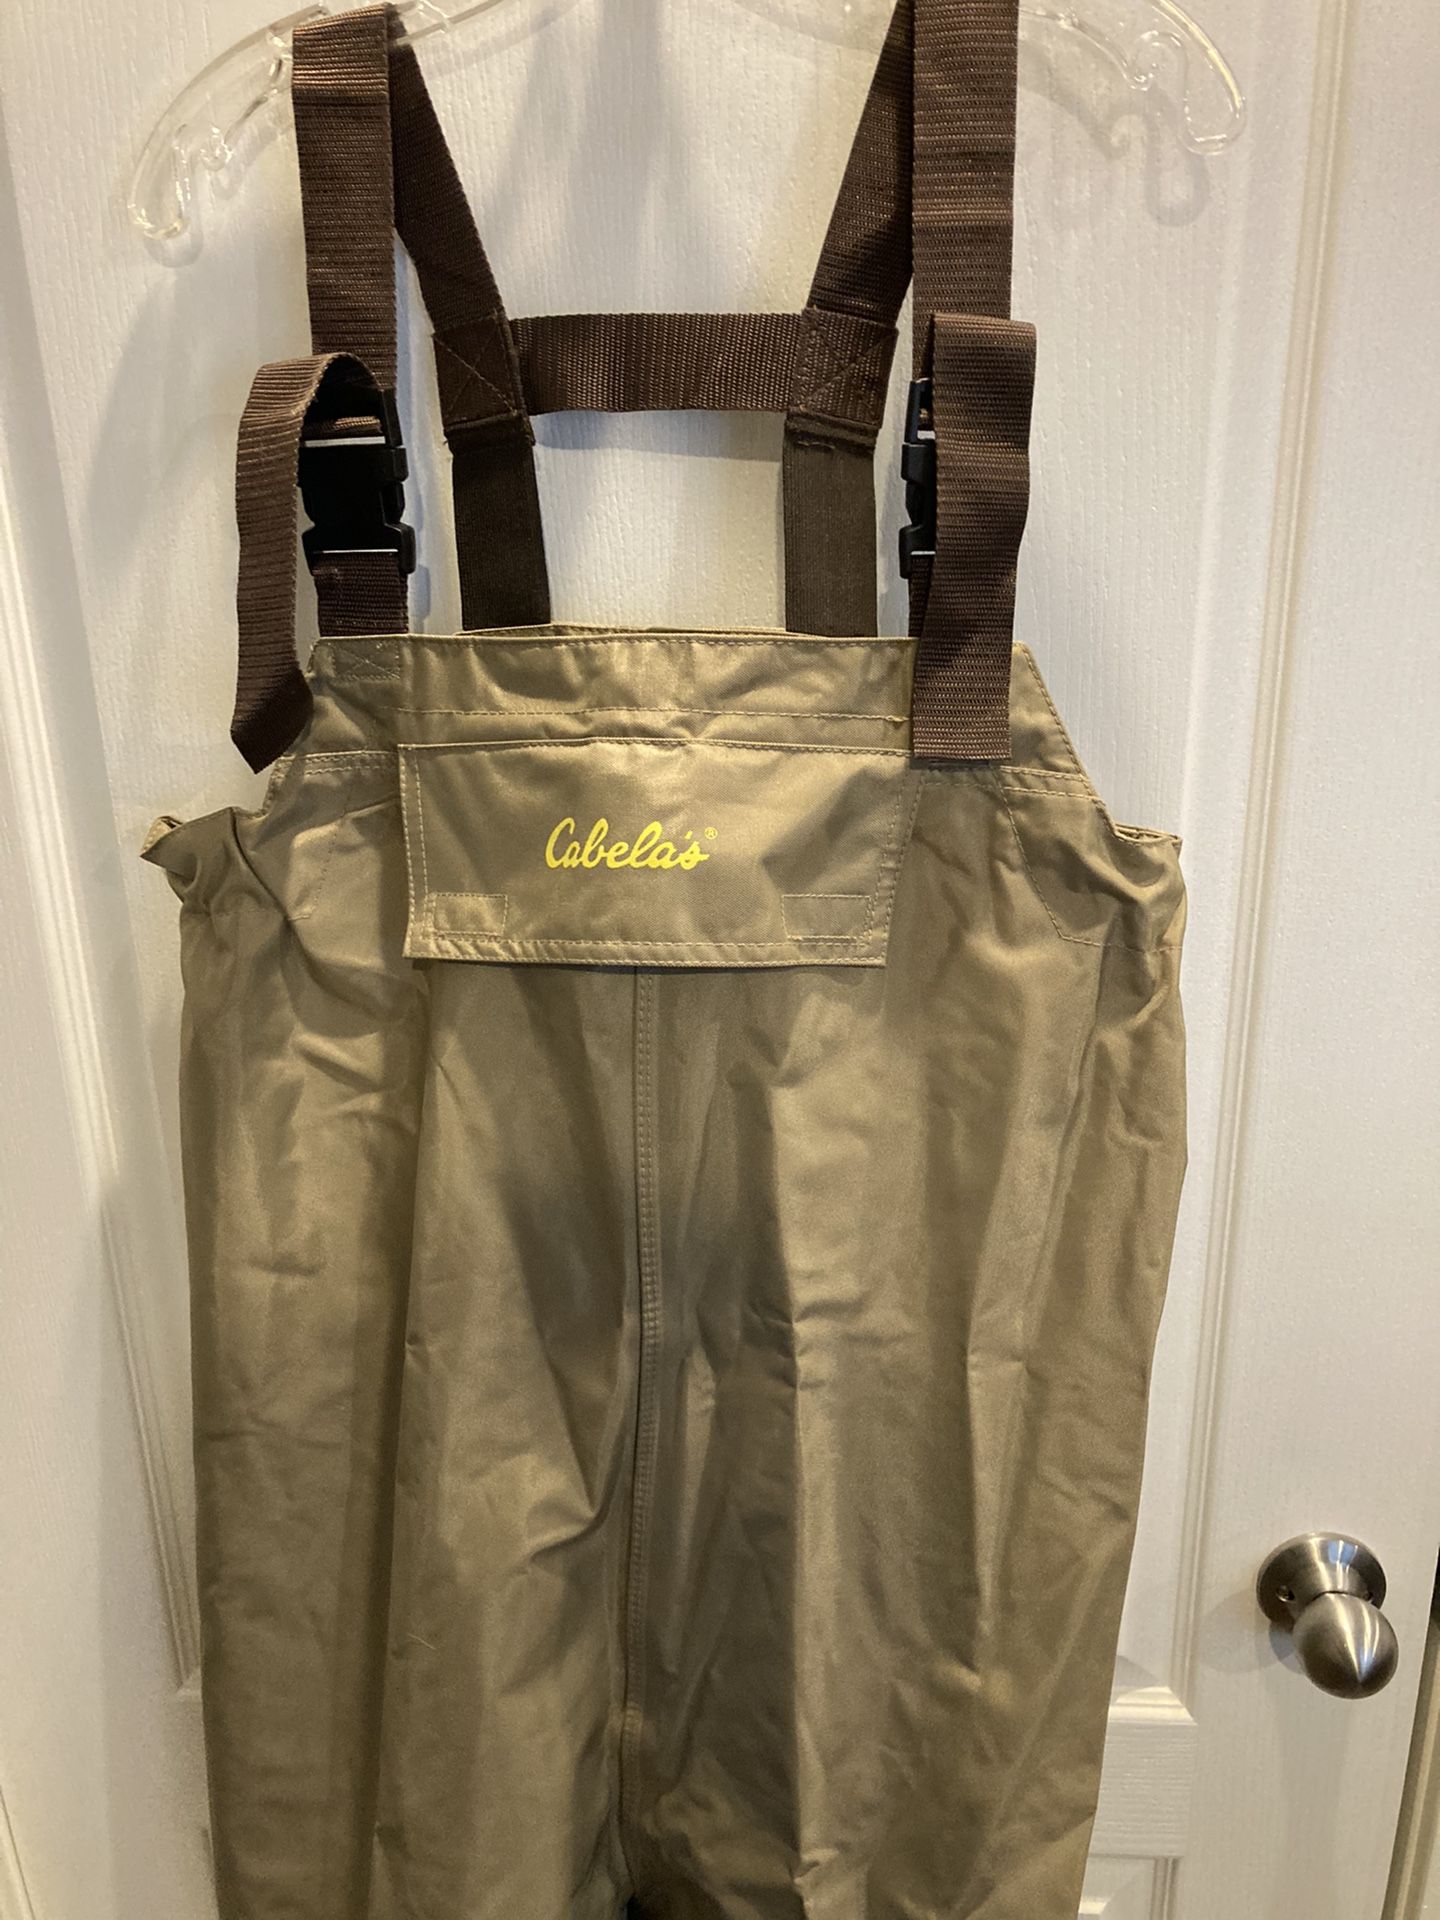 Cabelas Fishing Waders Sz Lg for Sale in Graham, WA - OfferUp